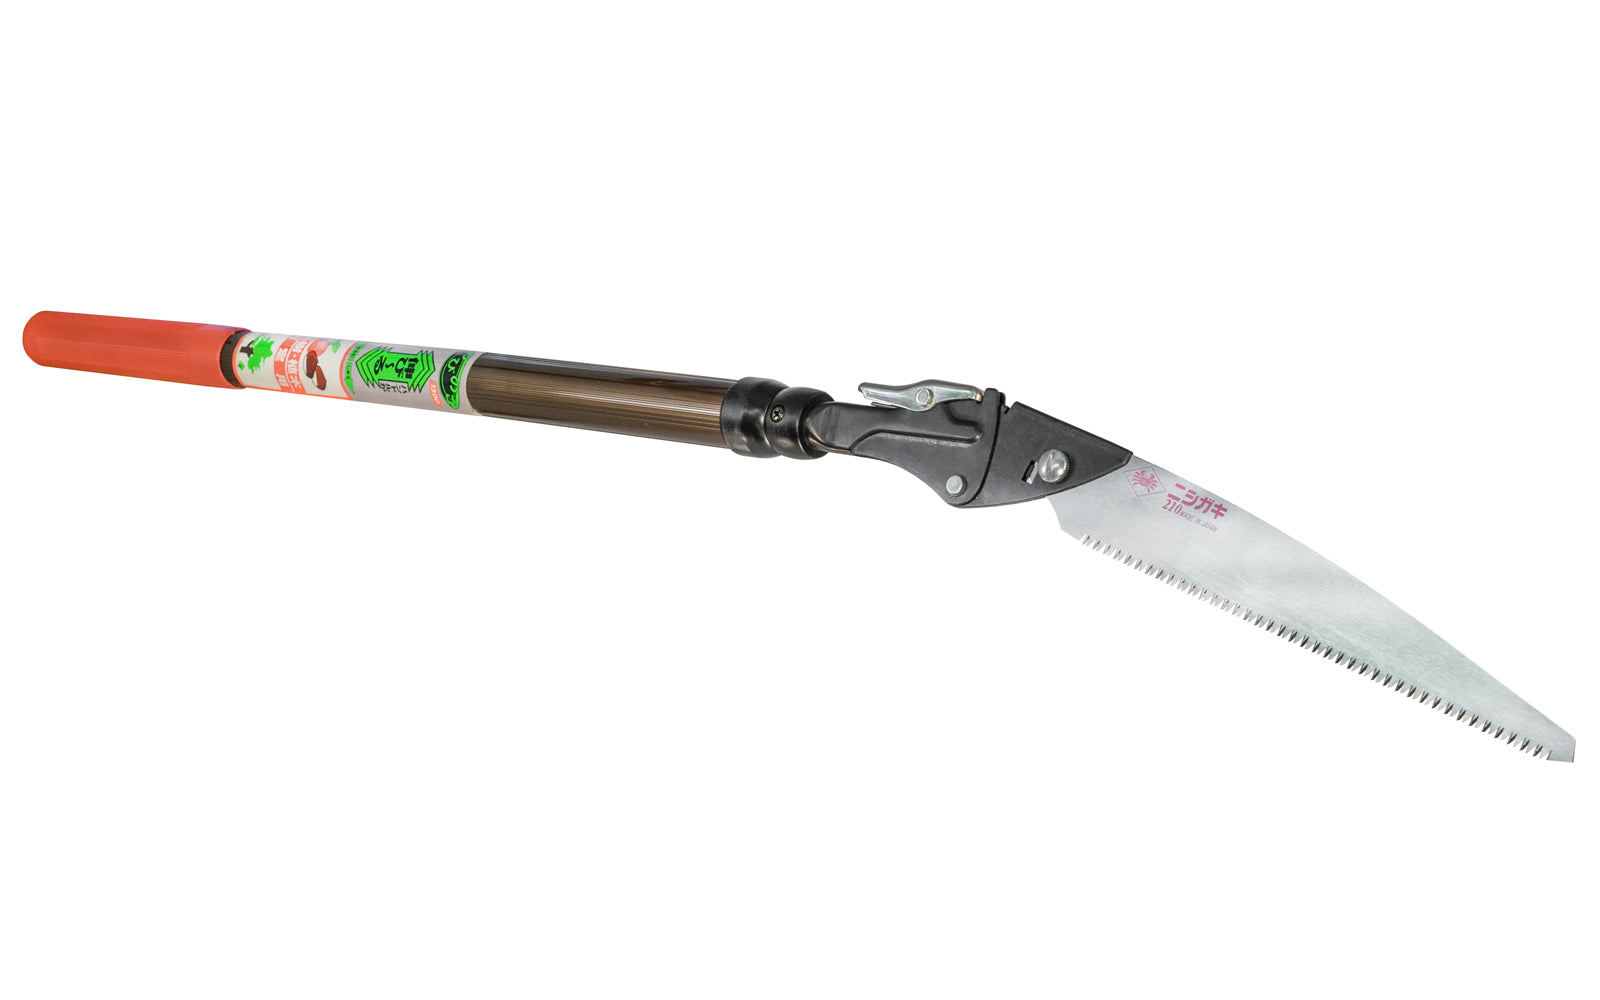 Japanese Telescoping Pruning Saw - 34-1/4" long pruning saw & extends to 51-1/4" length